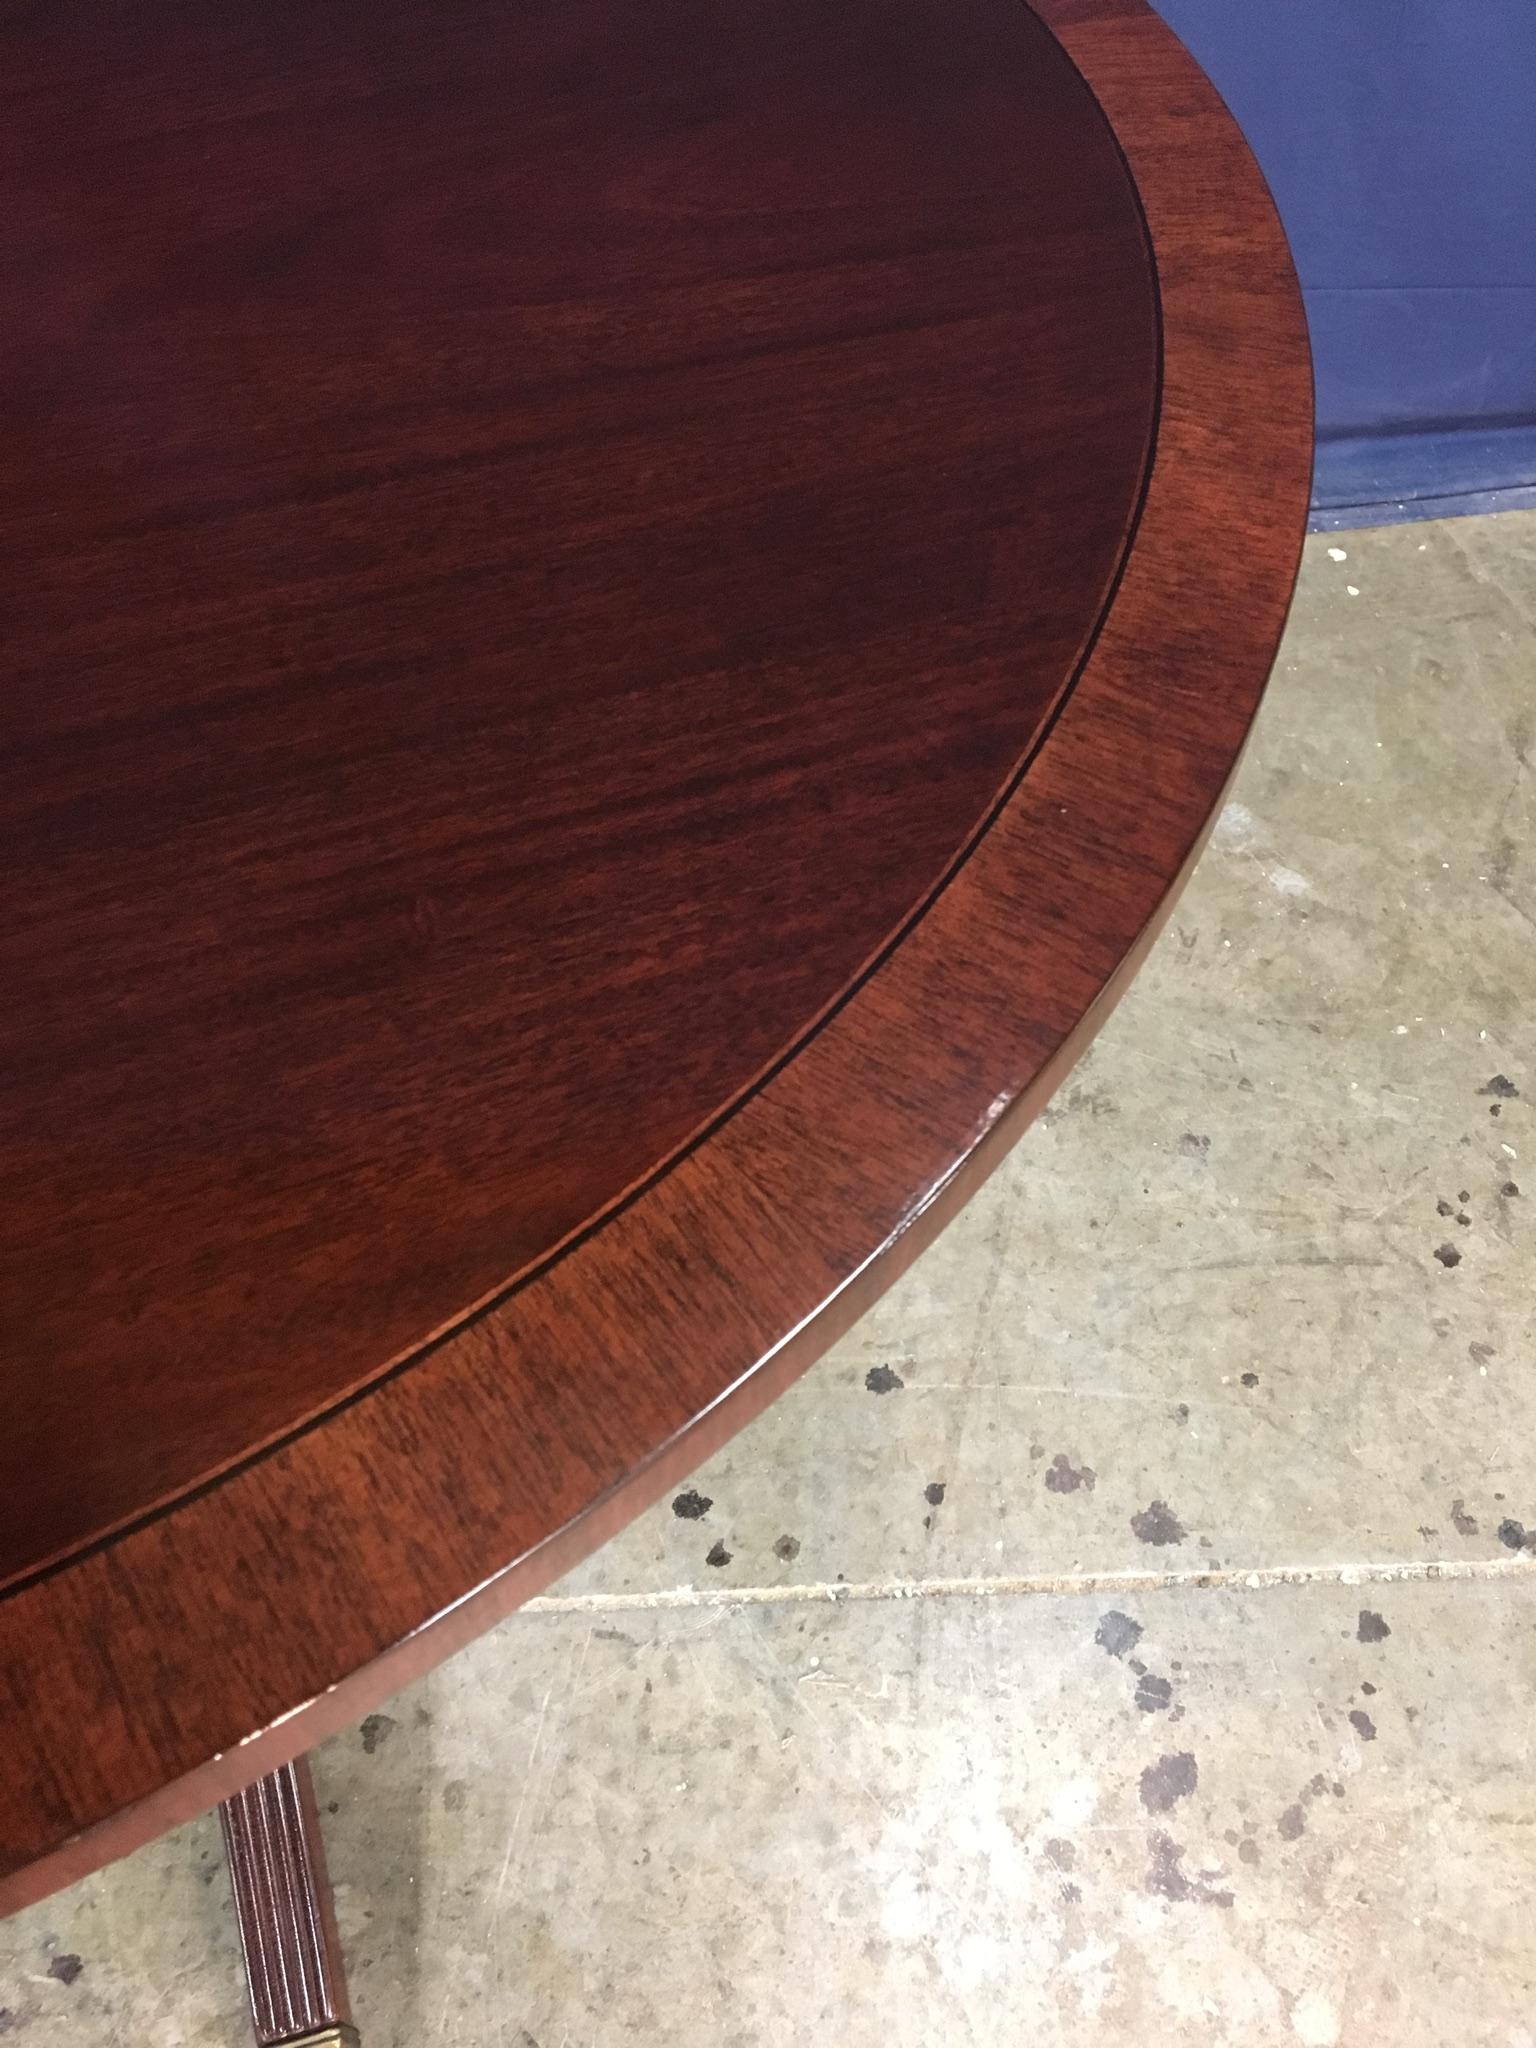 antique round foyer table